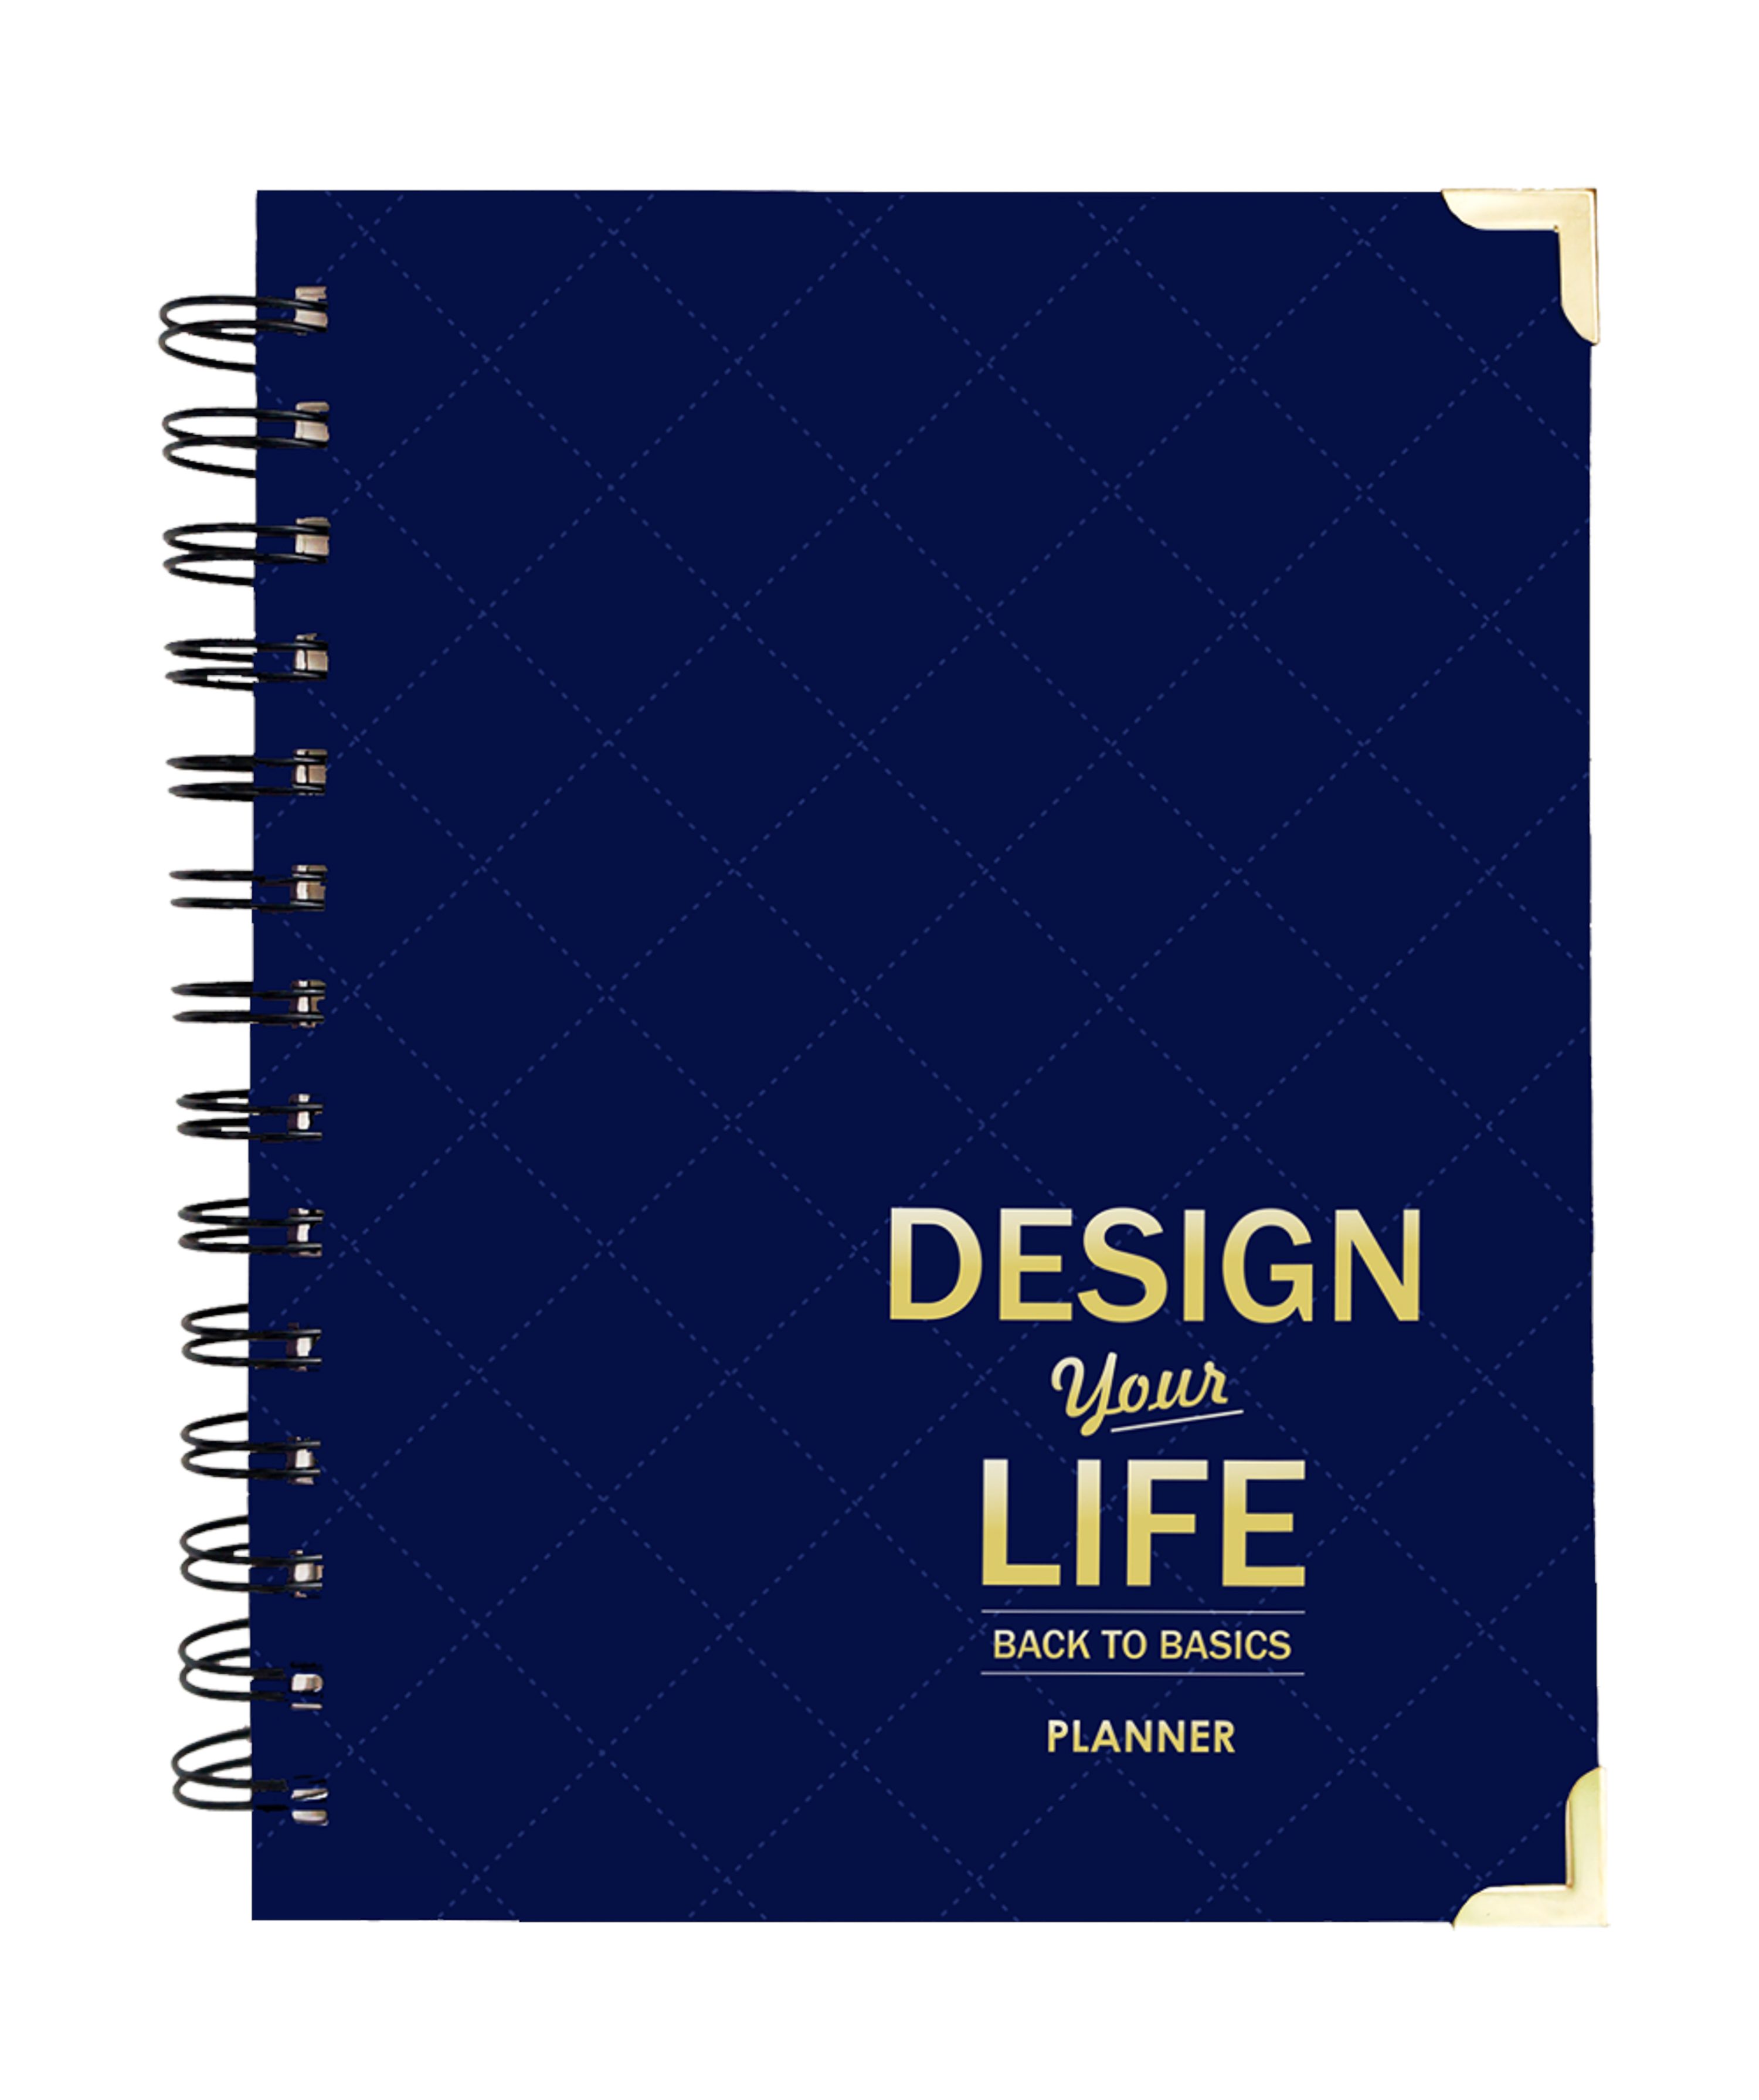 Design Your Life (Back to Basics) planner, P595. Photo courtesy of CNS Designs 